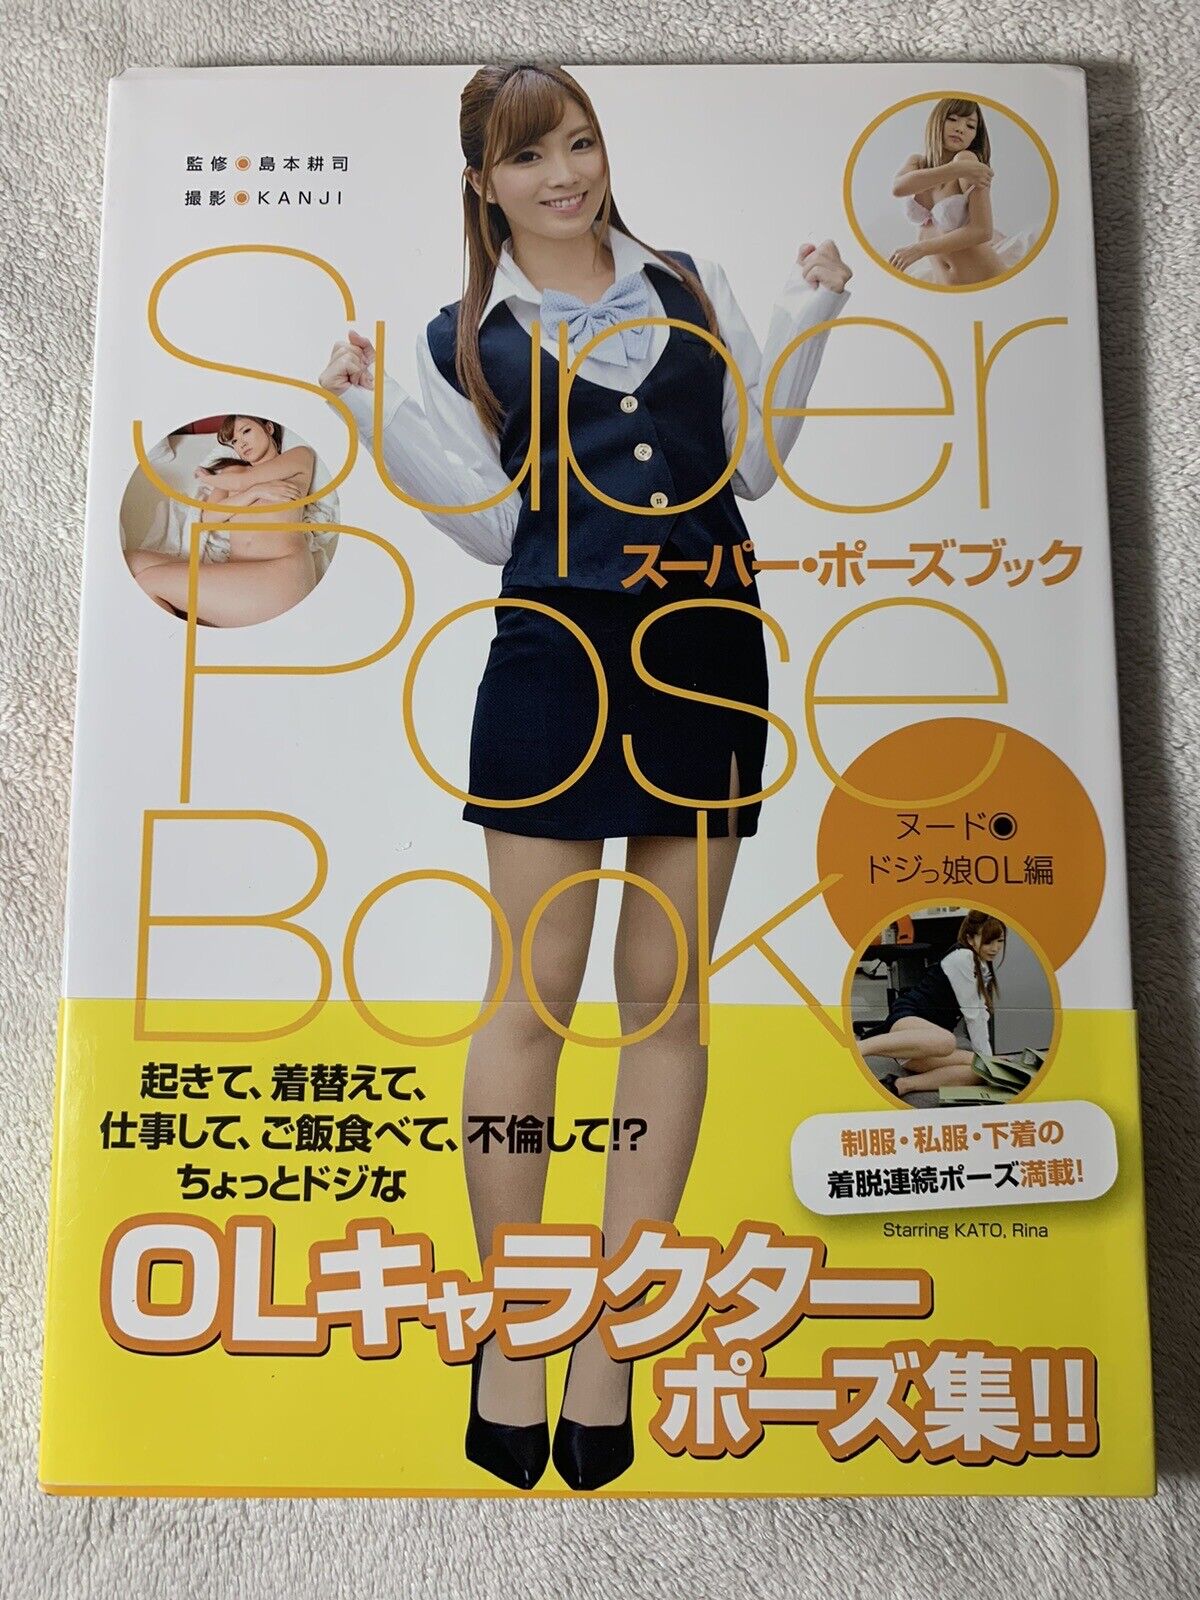 Super pose book nude Office lady edition Japanese Gravure